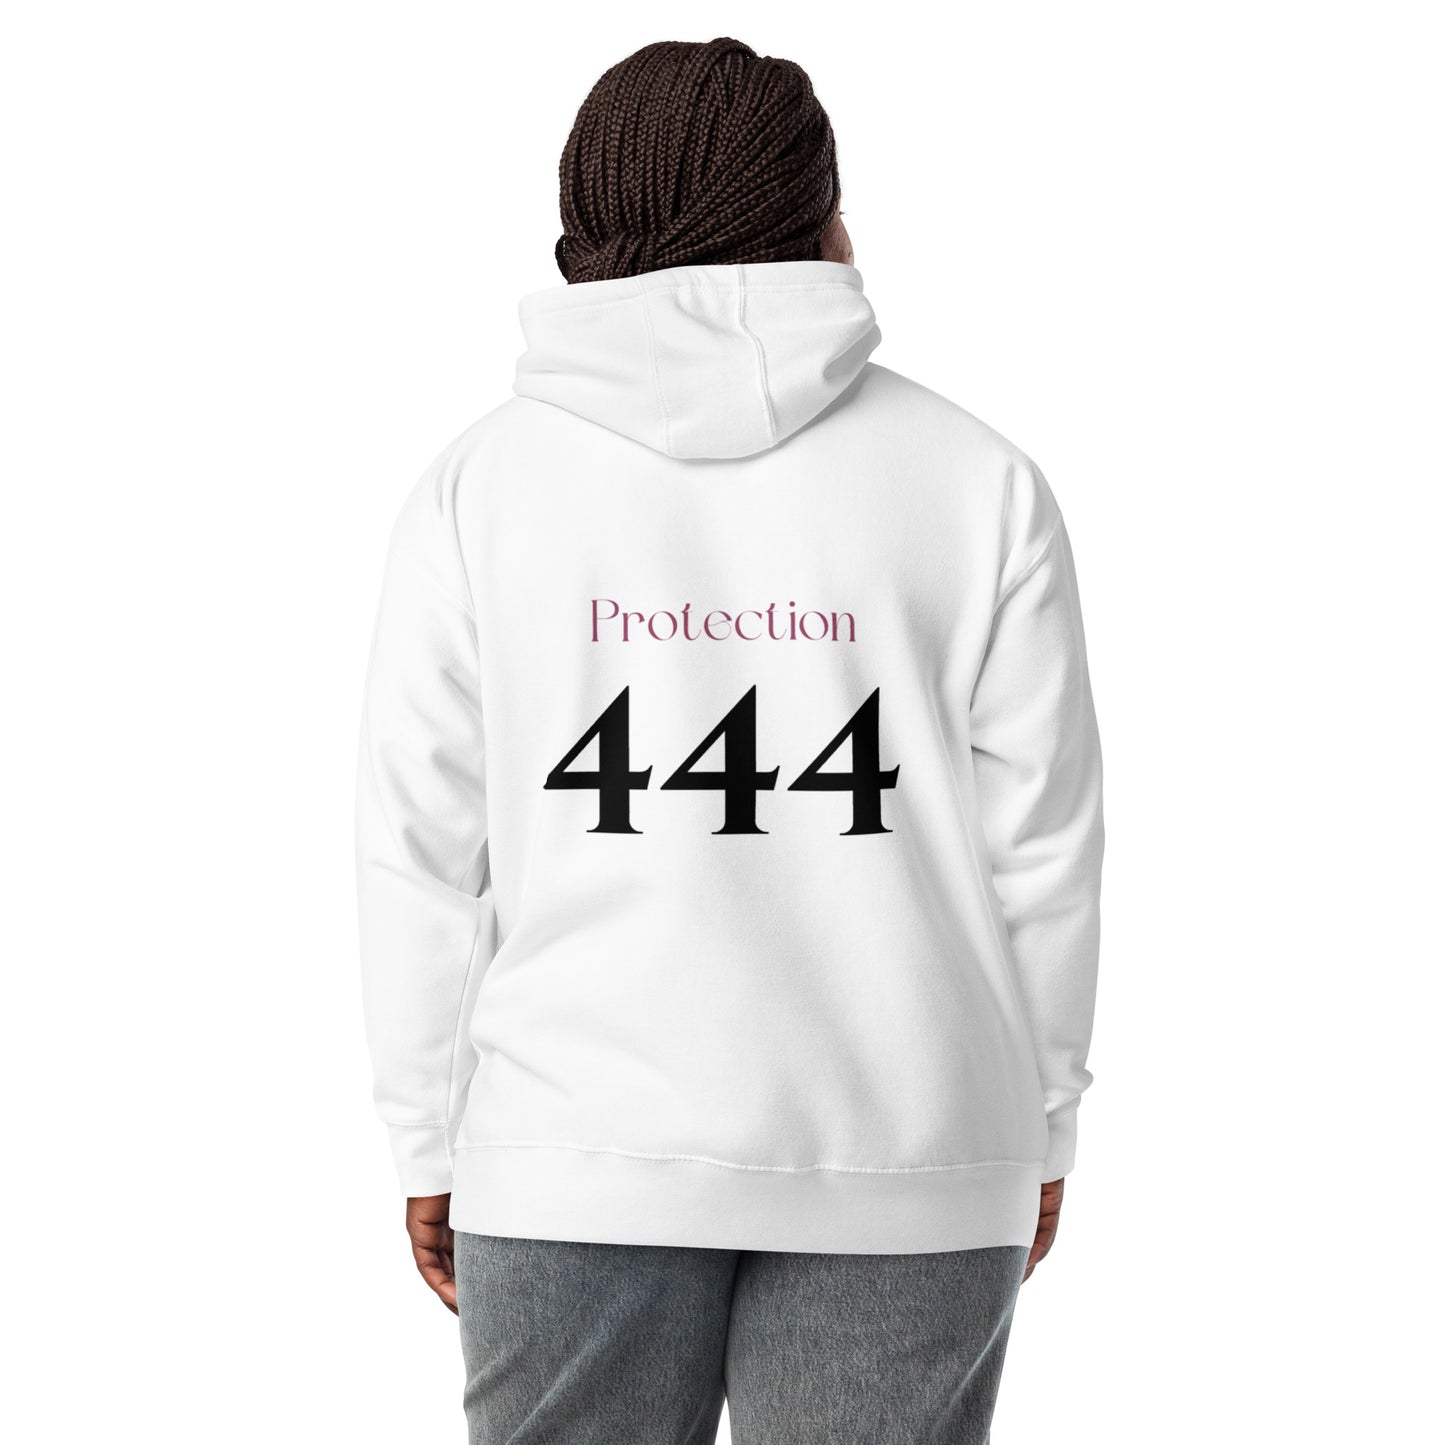 444 Protection White Unisex Hoodie